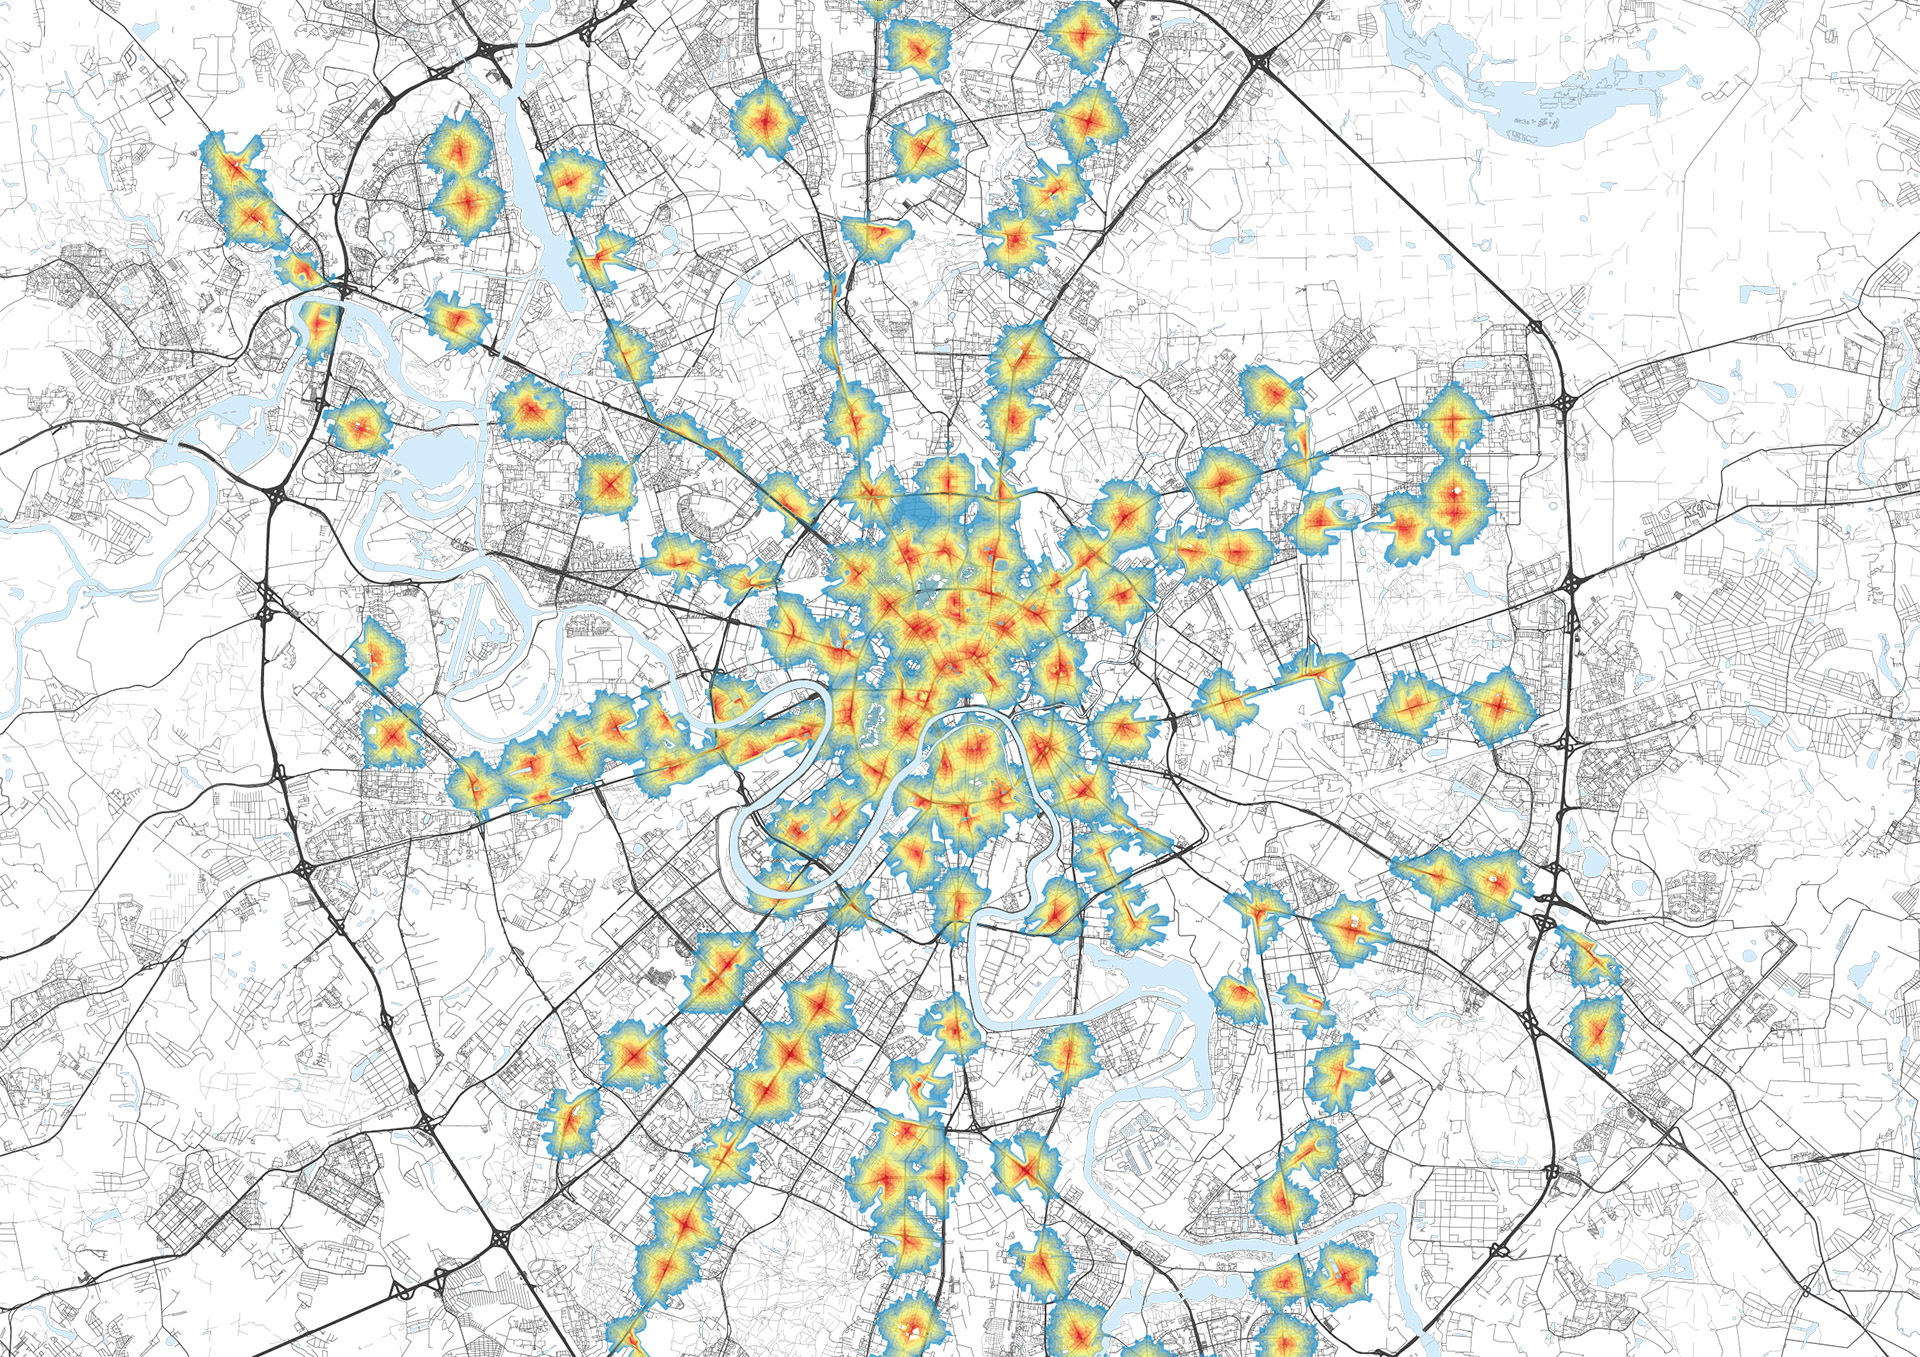 Pedestrian isochrone accessibility to metro stations